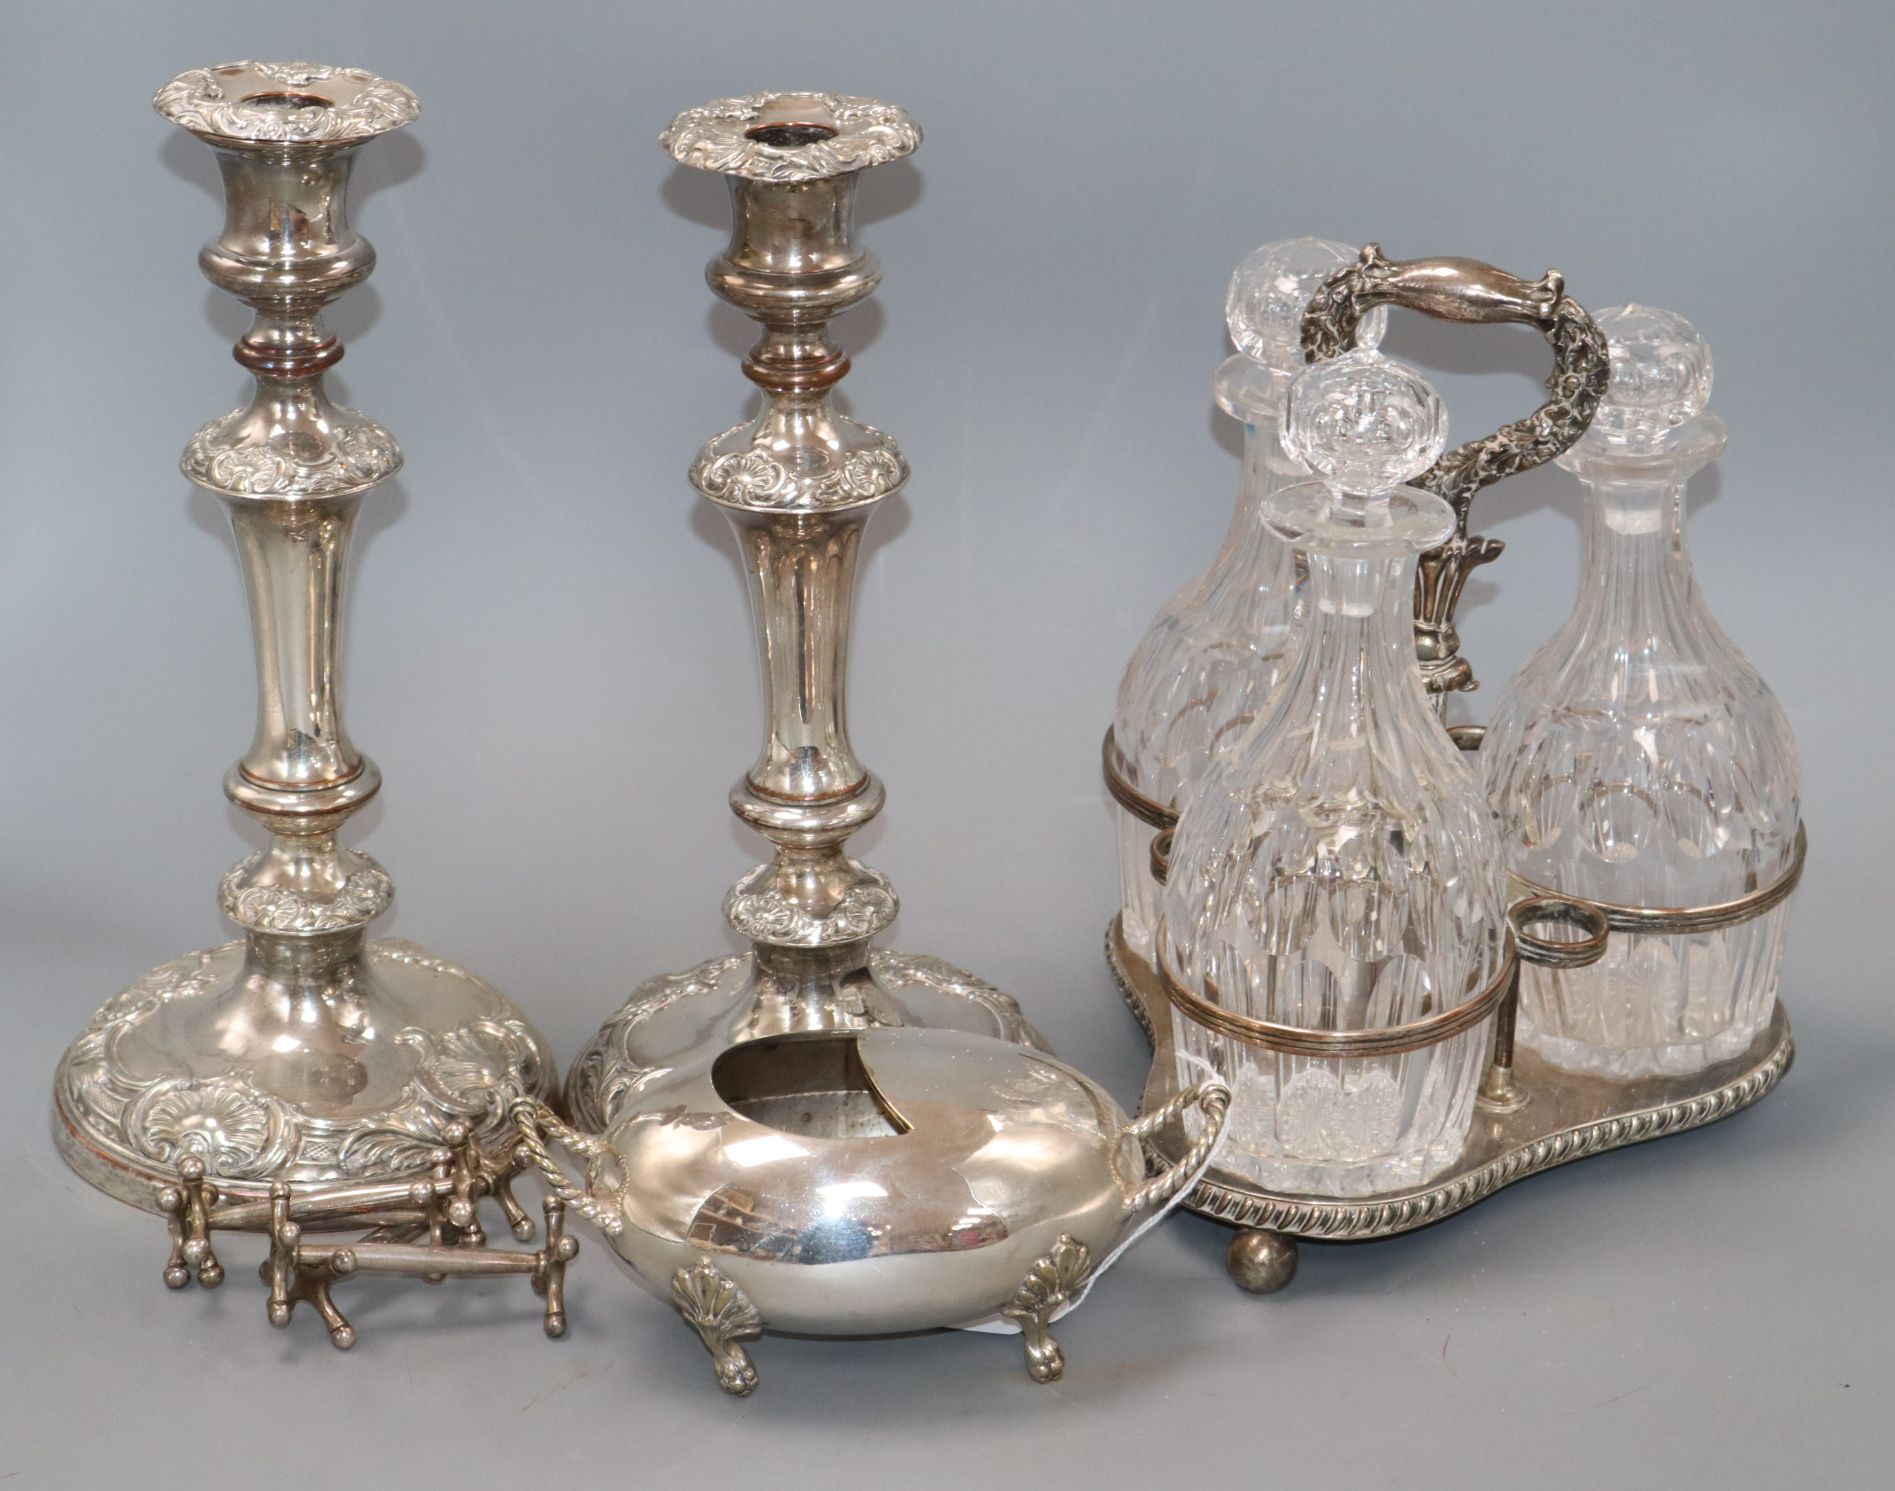 A quantity of plated wares including a pair of candlesticks